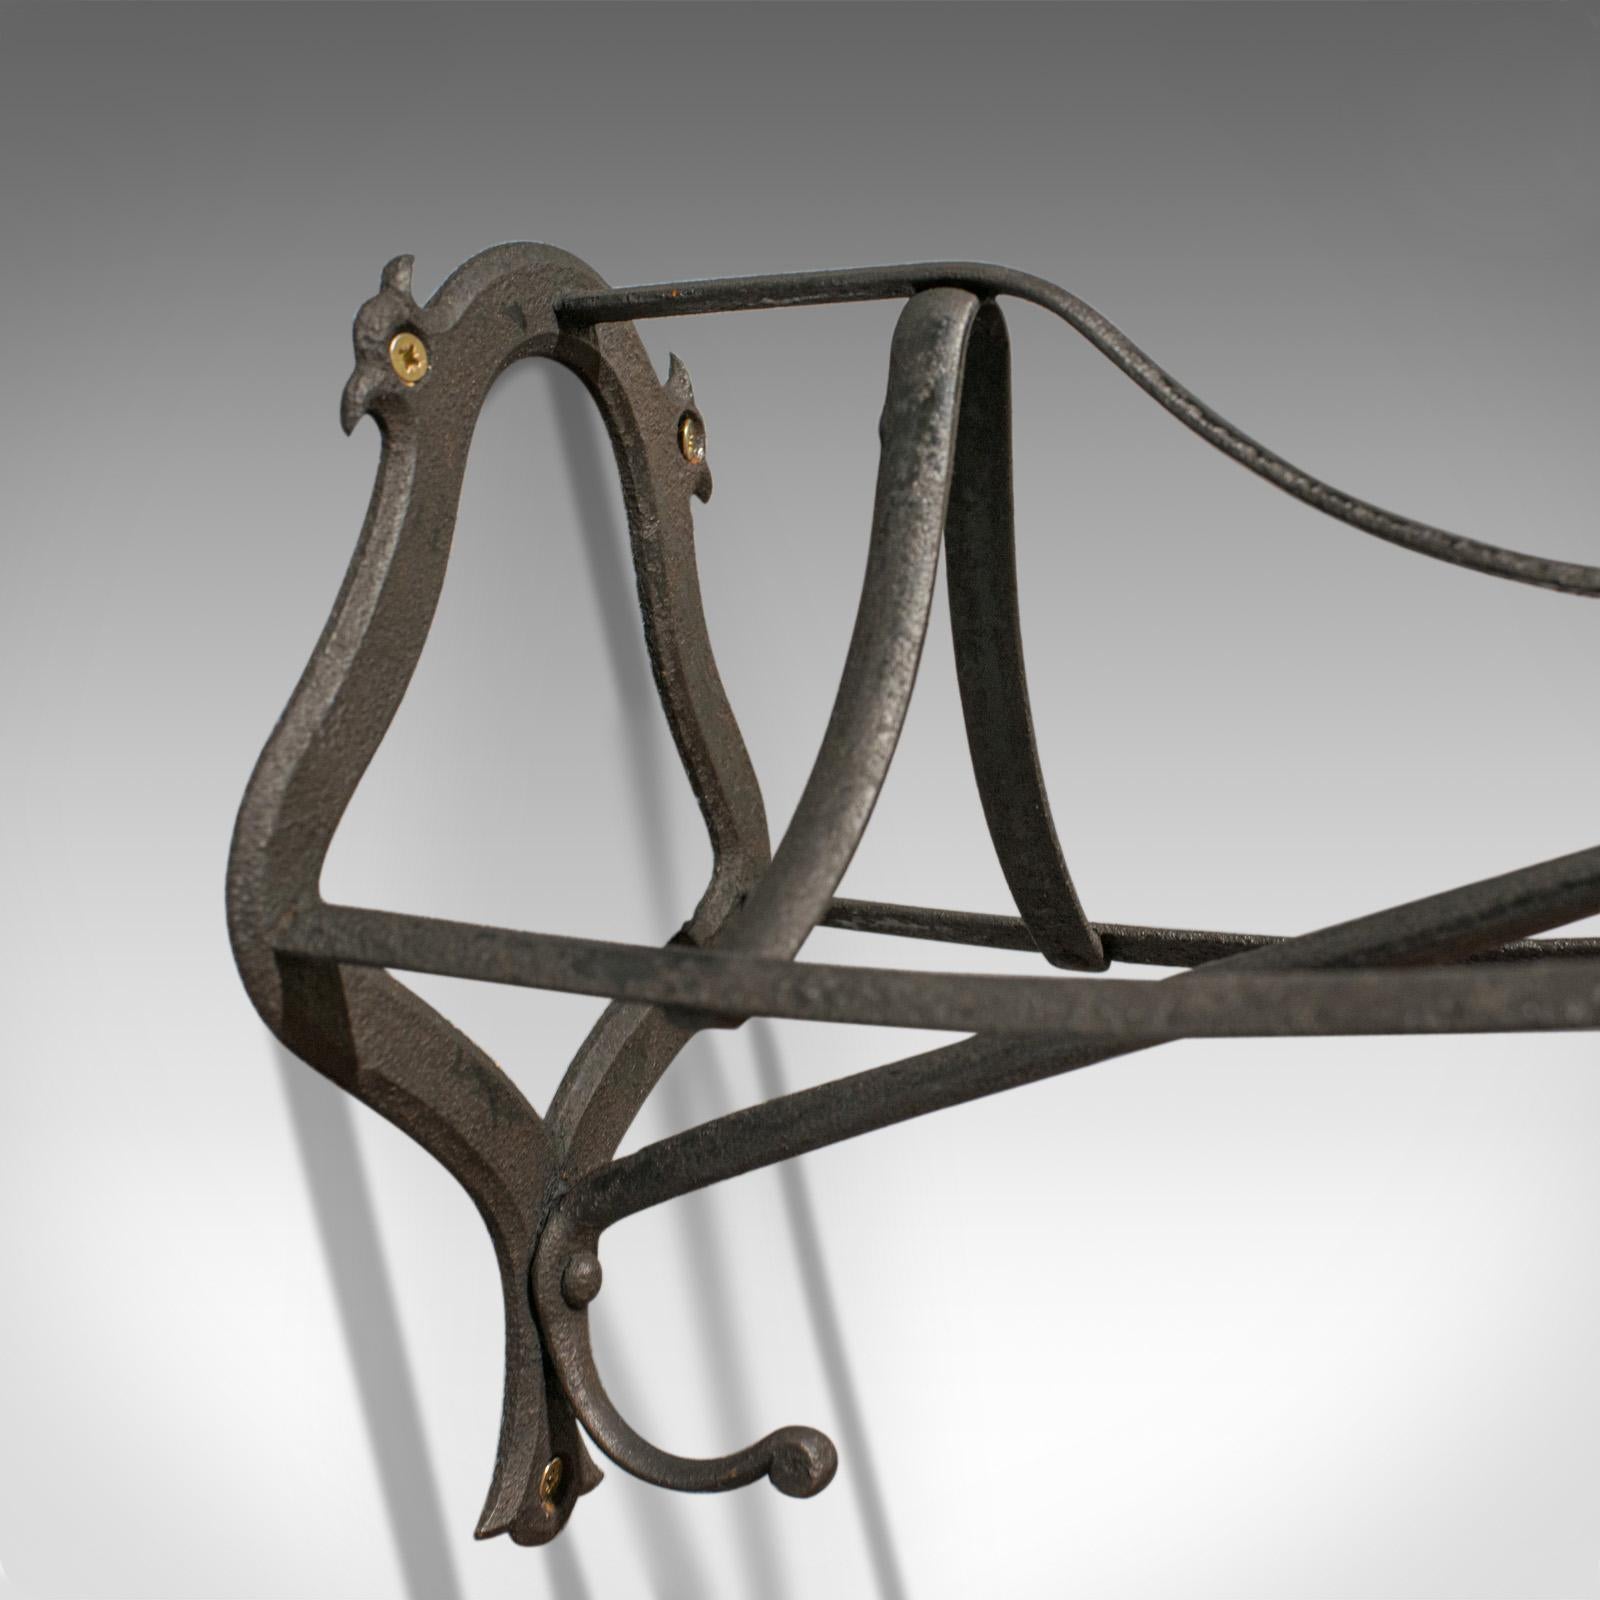 Late Victorian Antique Saddle Rack, English, Victorian, Wall Mounted, Forged Iron, circa 1900